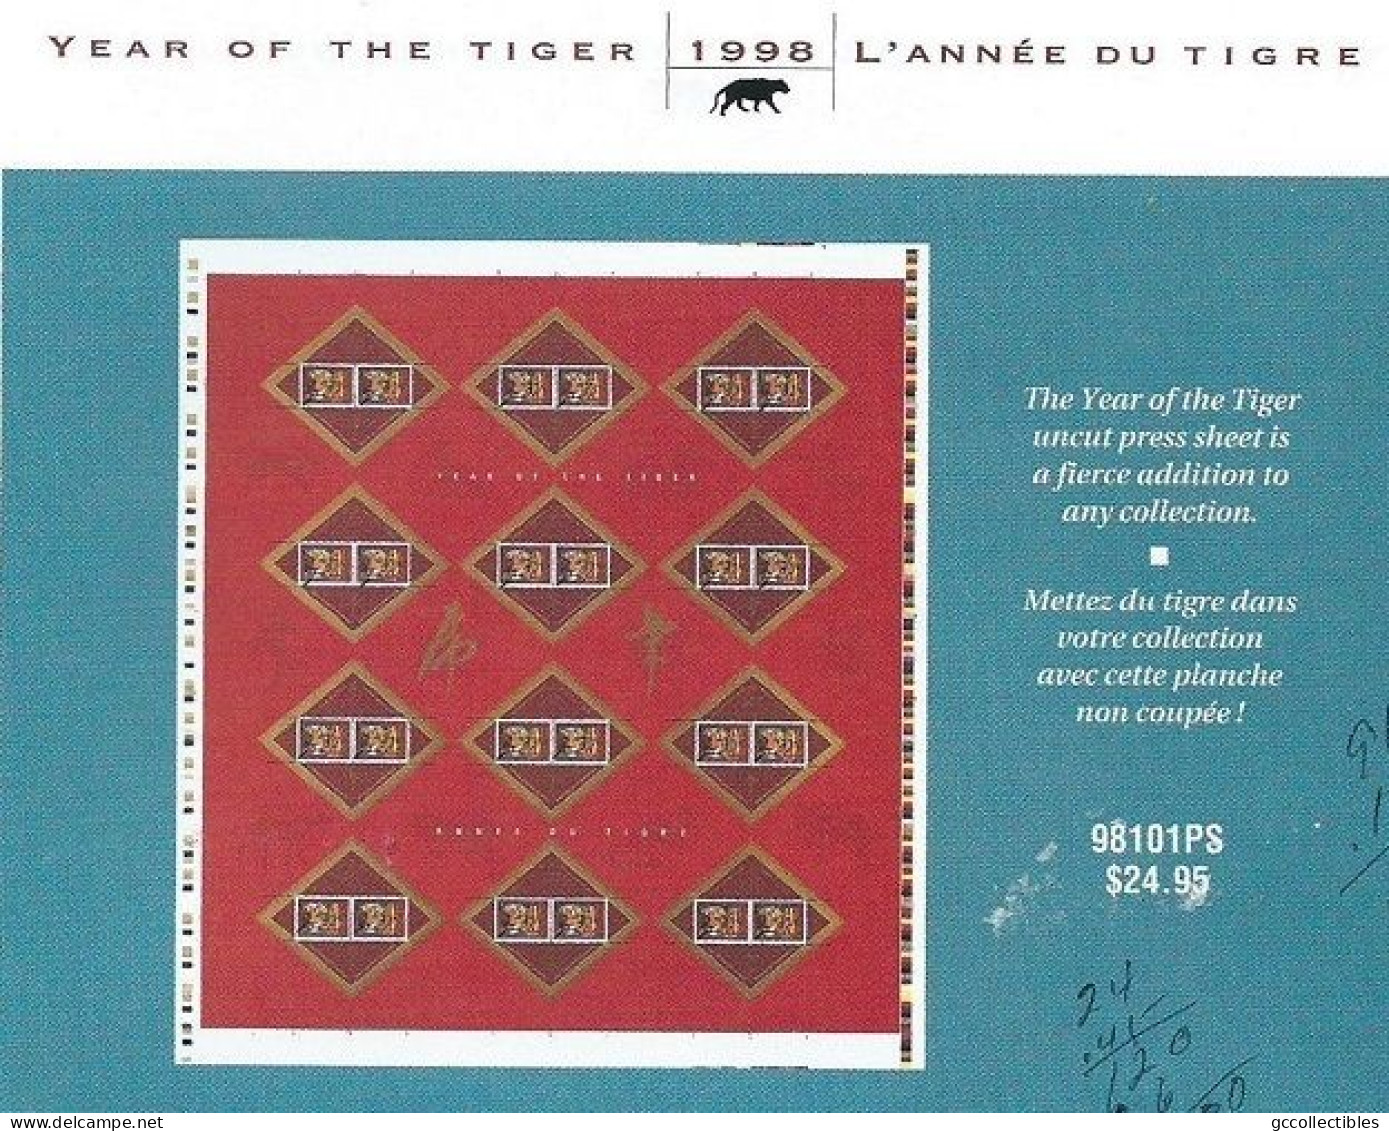 CANADA # 1708ai Uncut Press Sheet Limited Edition - Year Of The Tiger - 1998 - Full Sheets & Multiples